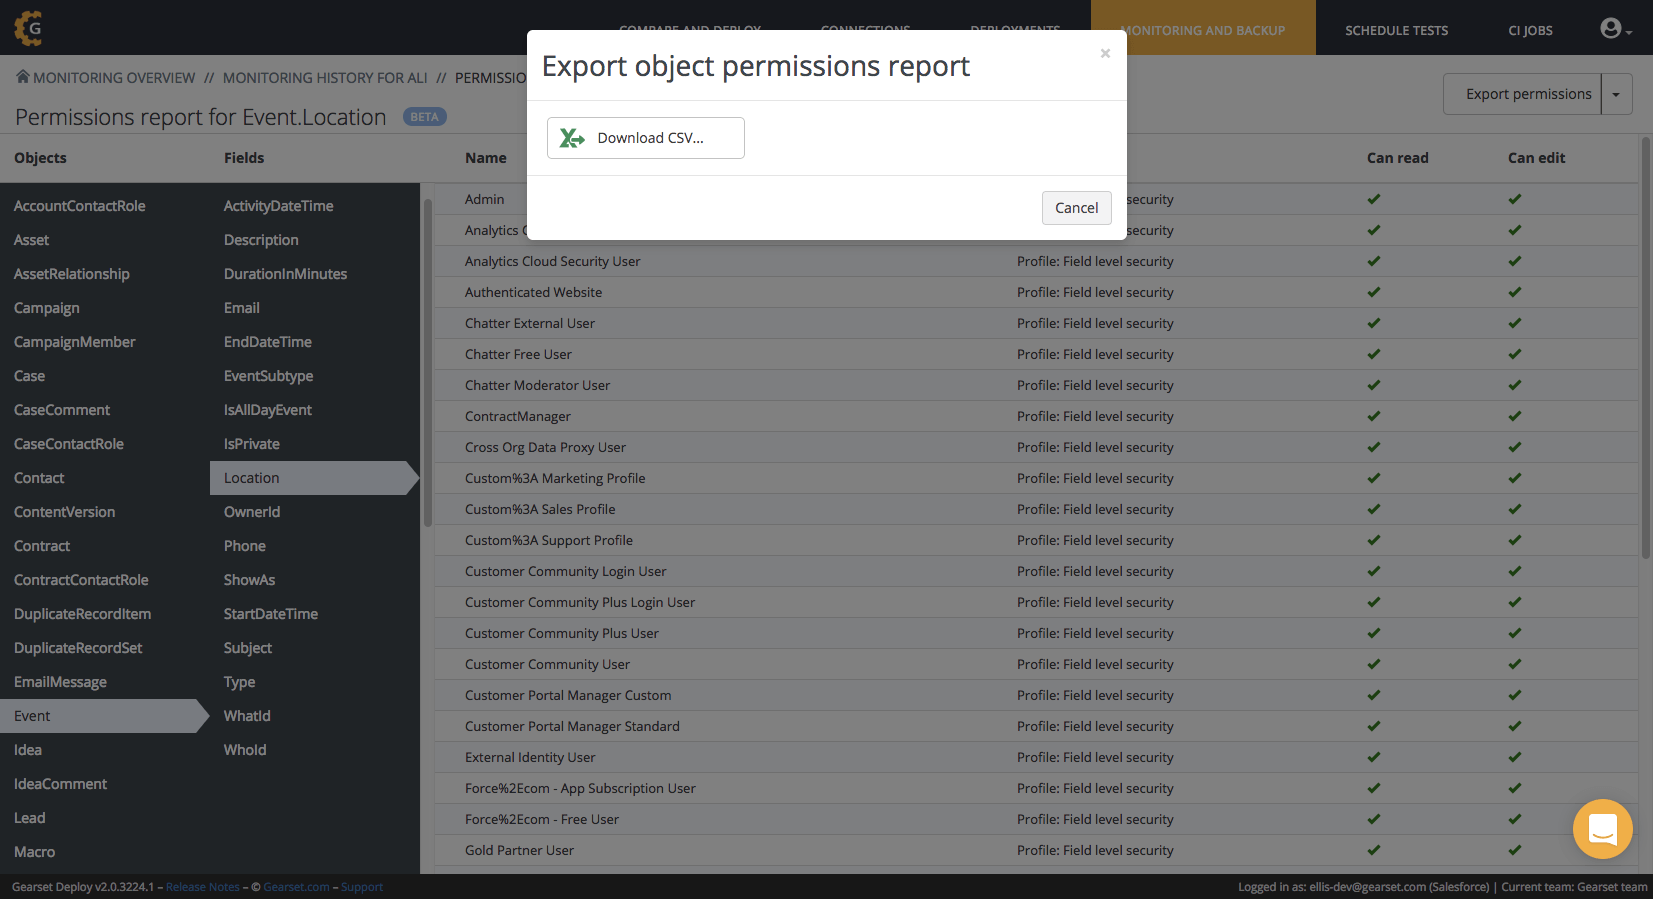 Download your object permissions reports